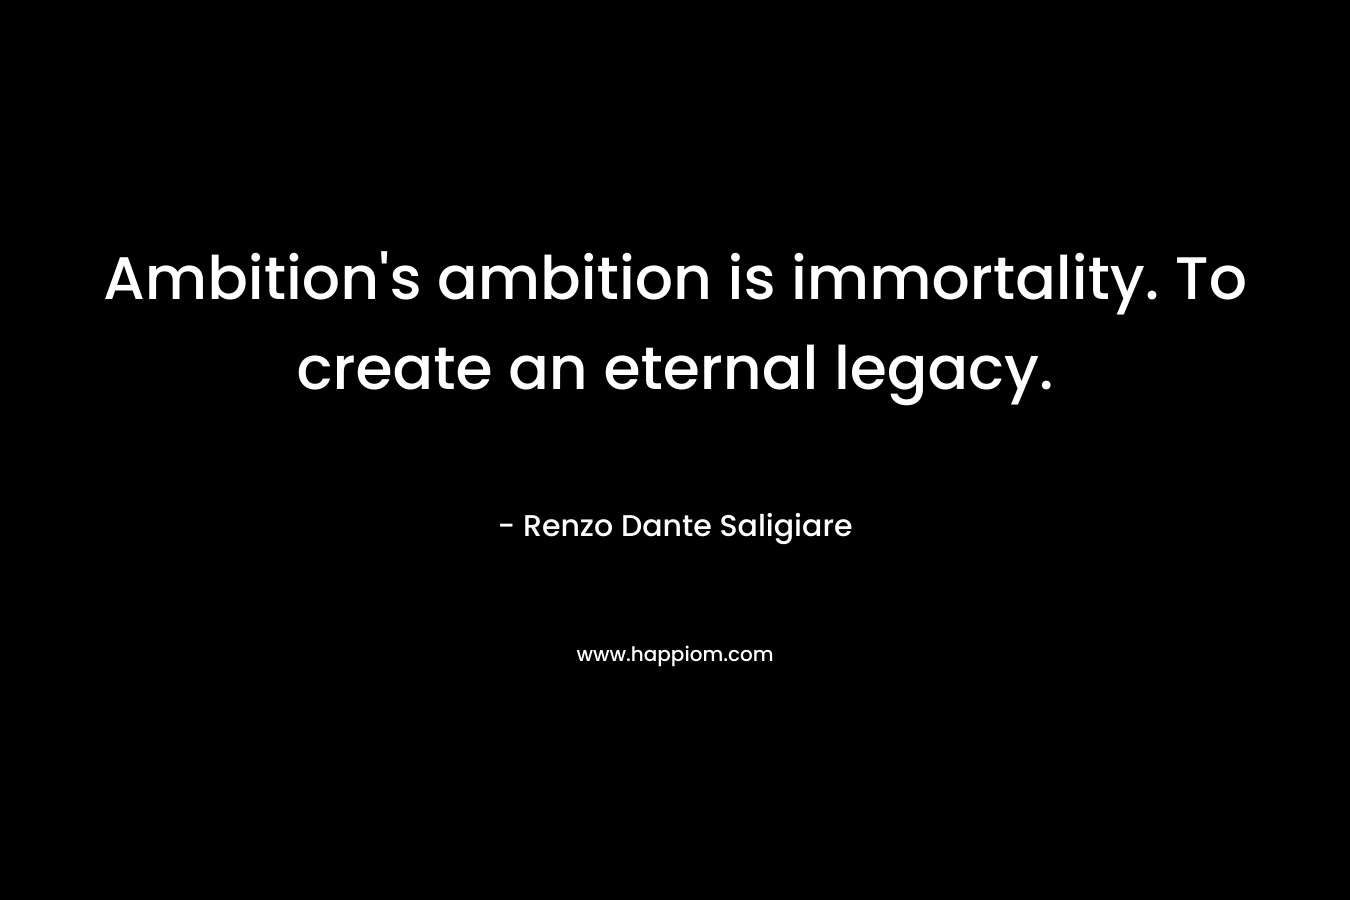 Ambition’s ambition is immortality. To create an eternal legacy. – Renzo Dante Saligiare